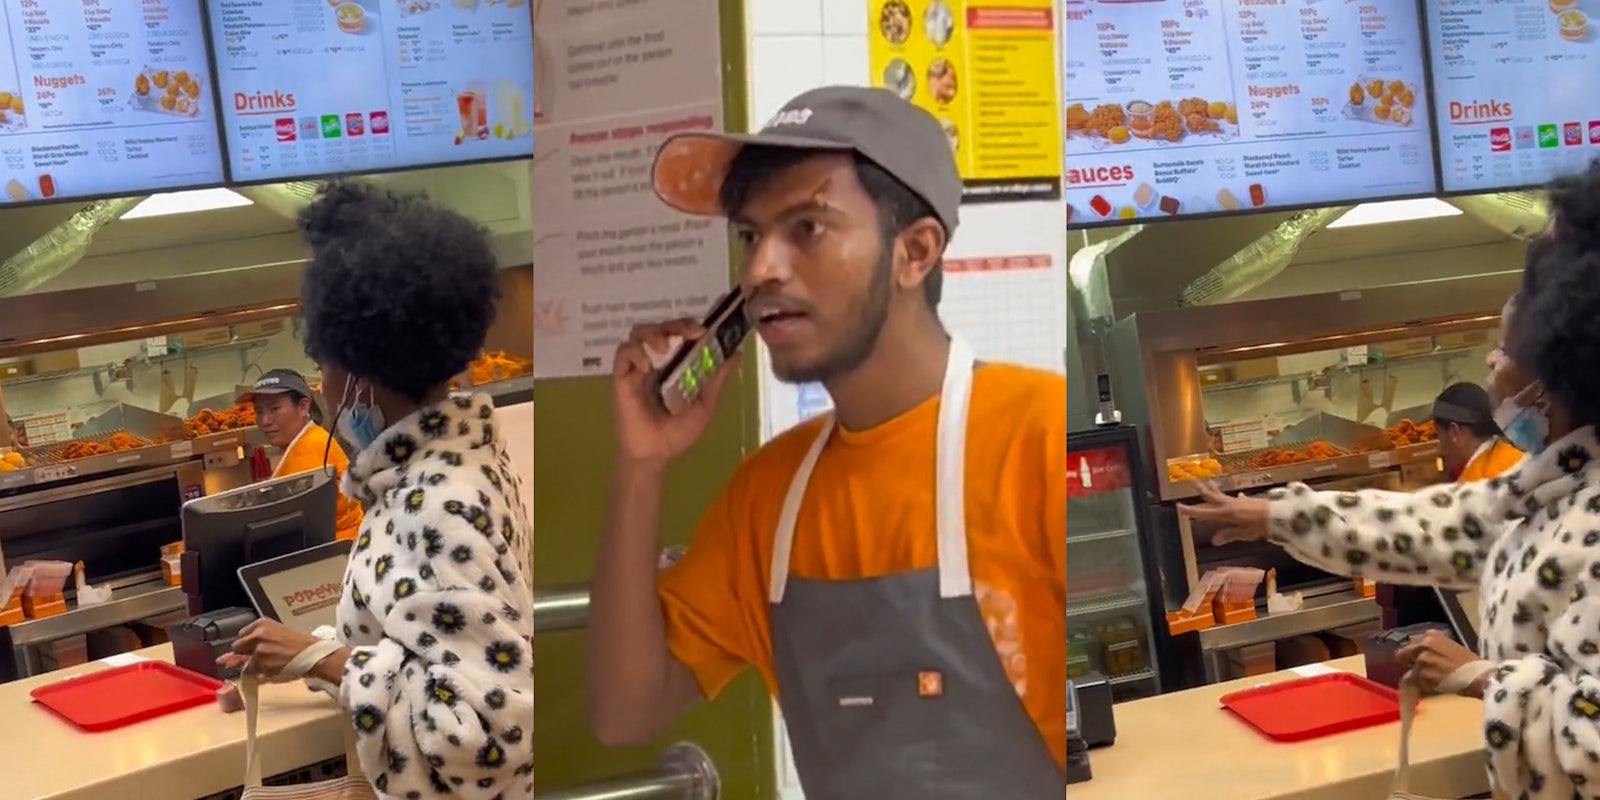 Popeye's customer grabbing sauce from counter (l) Popeye's employee on phone (c) Popeye's customer throwing sauce at employee (r)